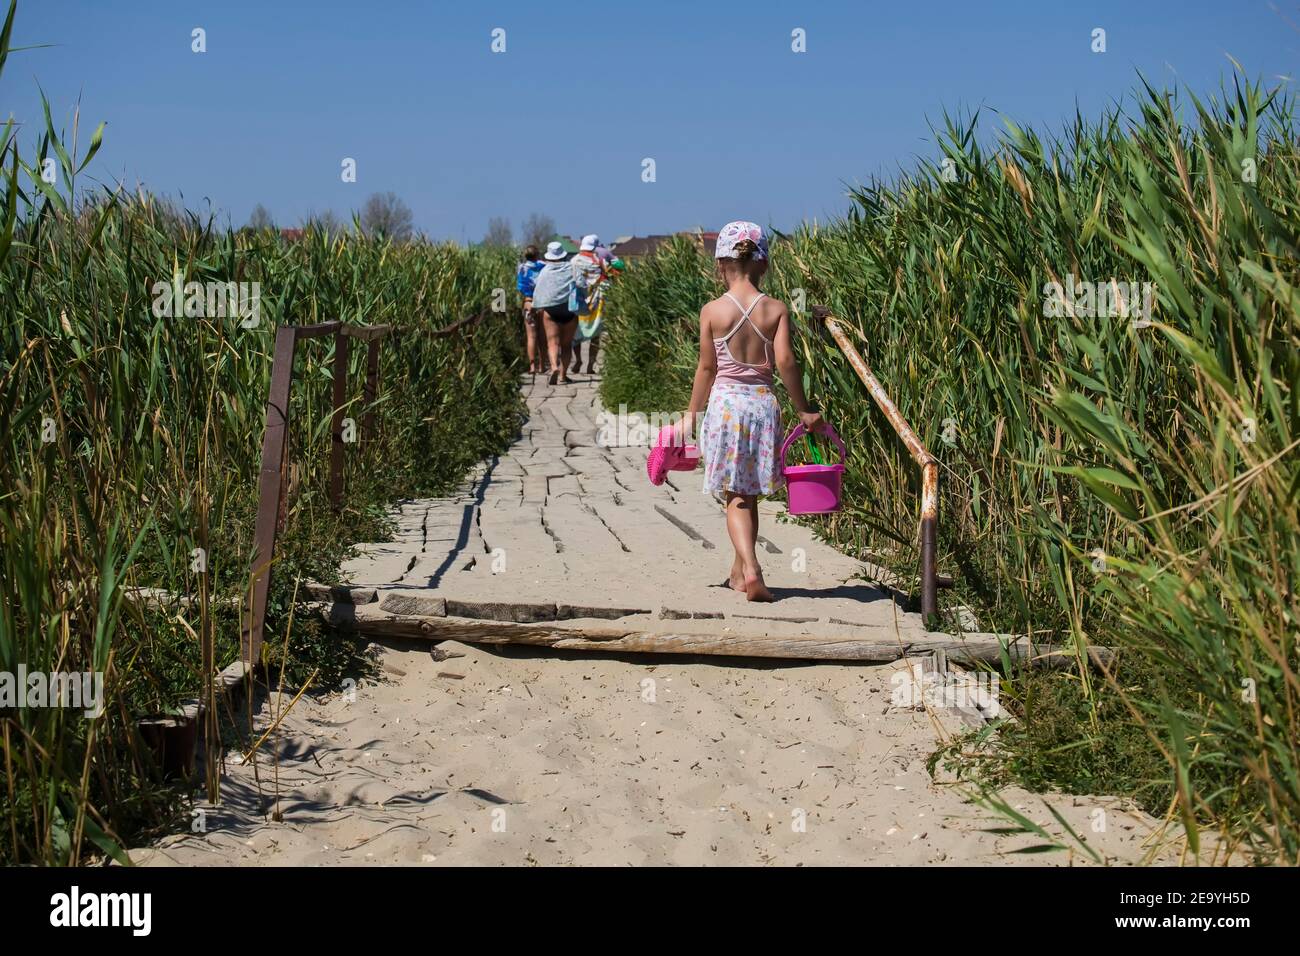 Small beach girl walks over a wooden bridge with a bucket and slippers in her hands Stock Photo